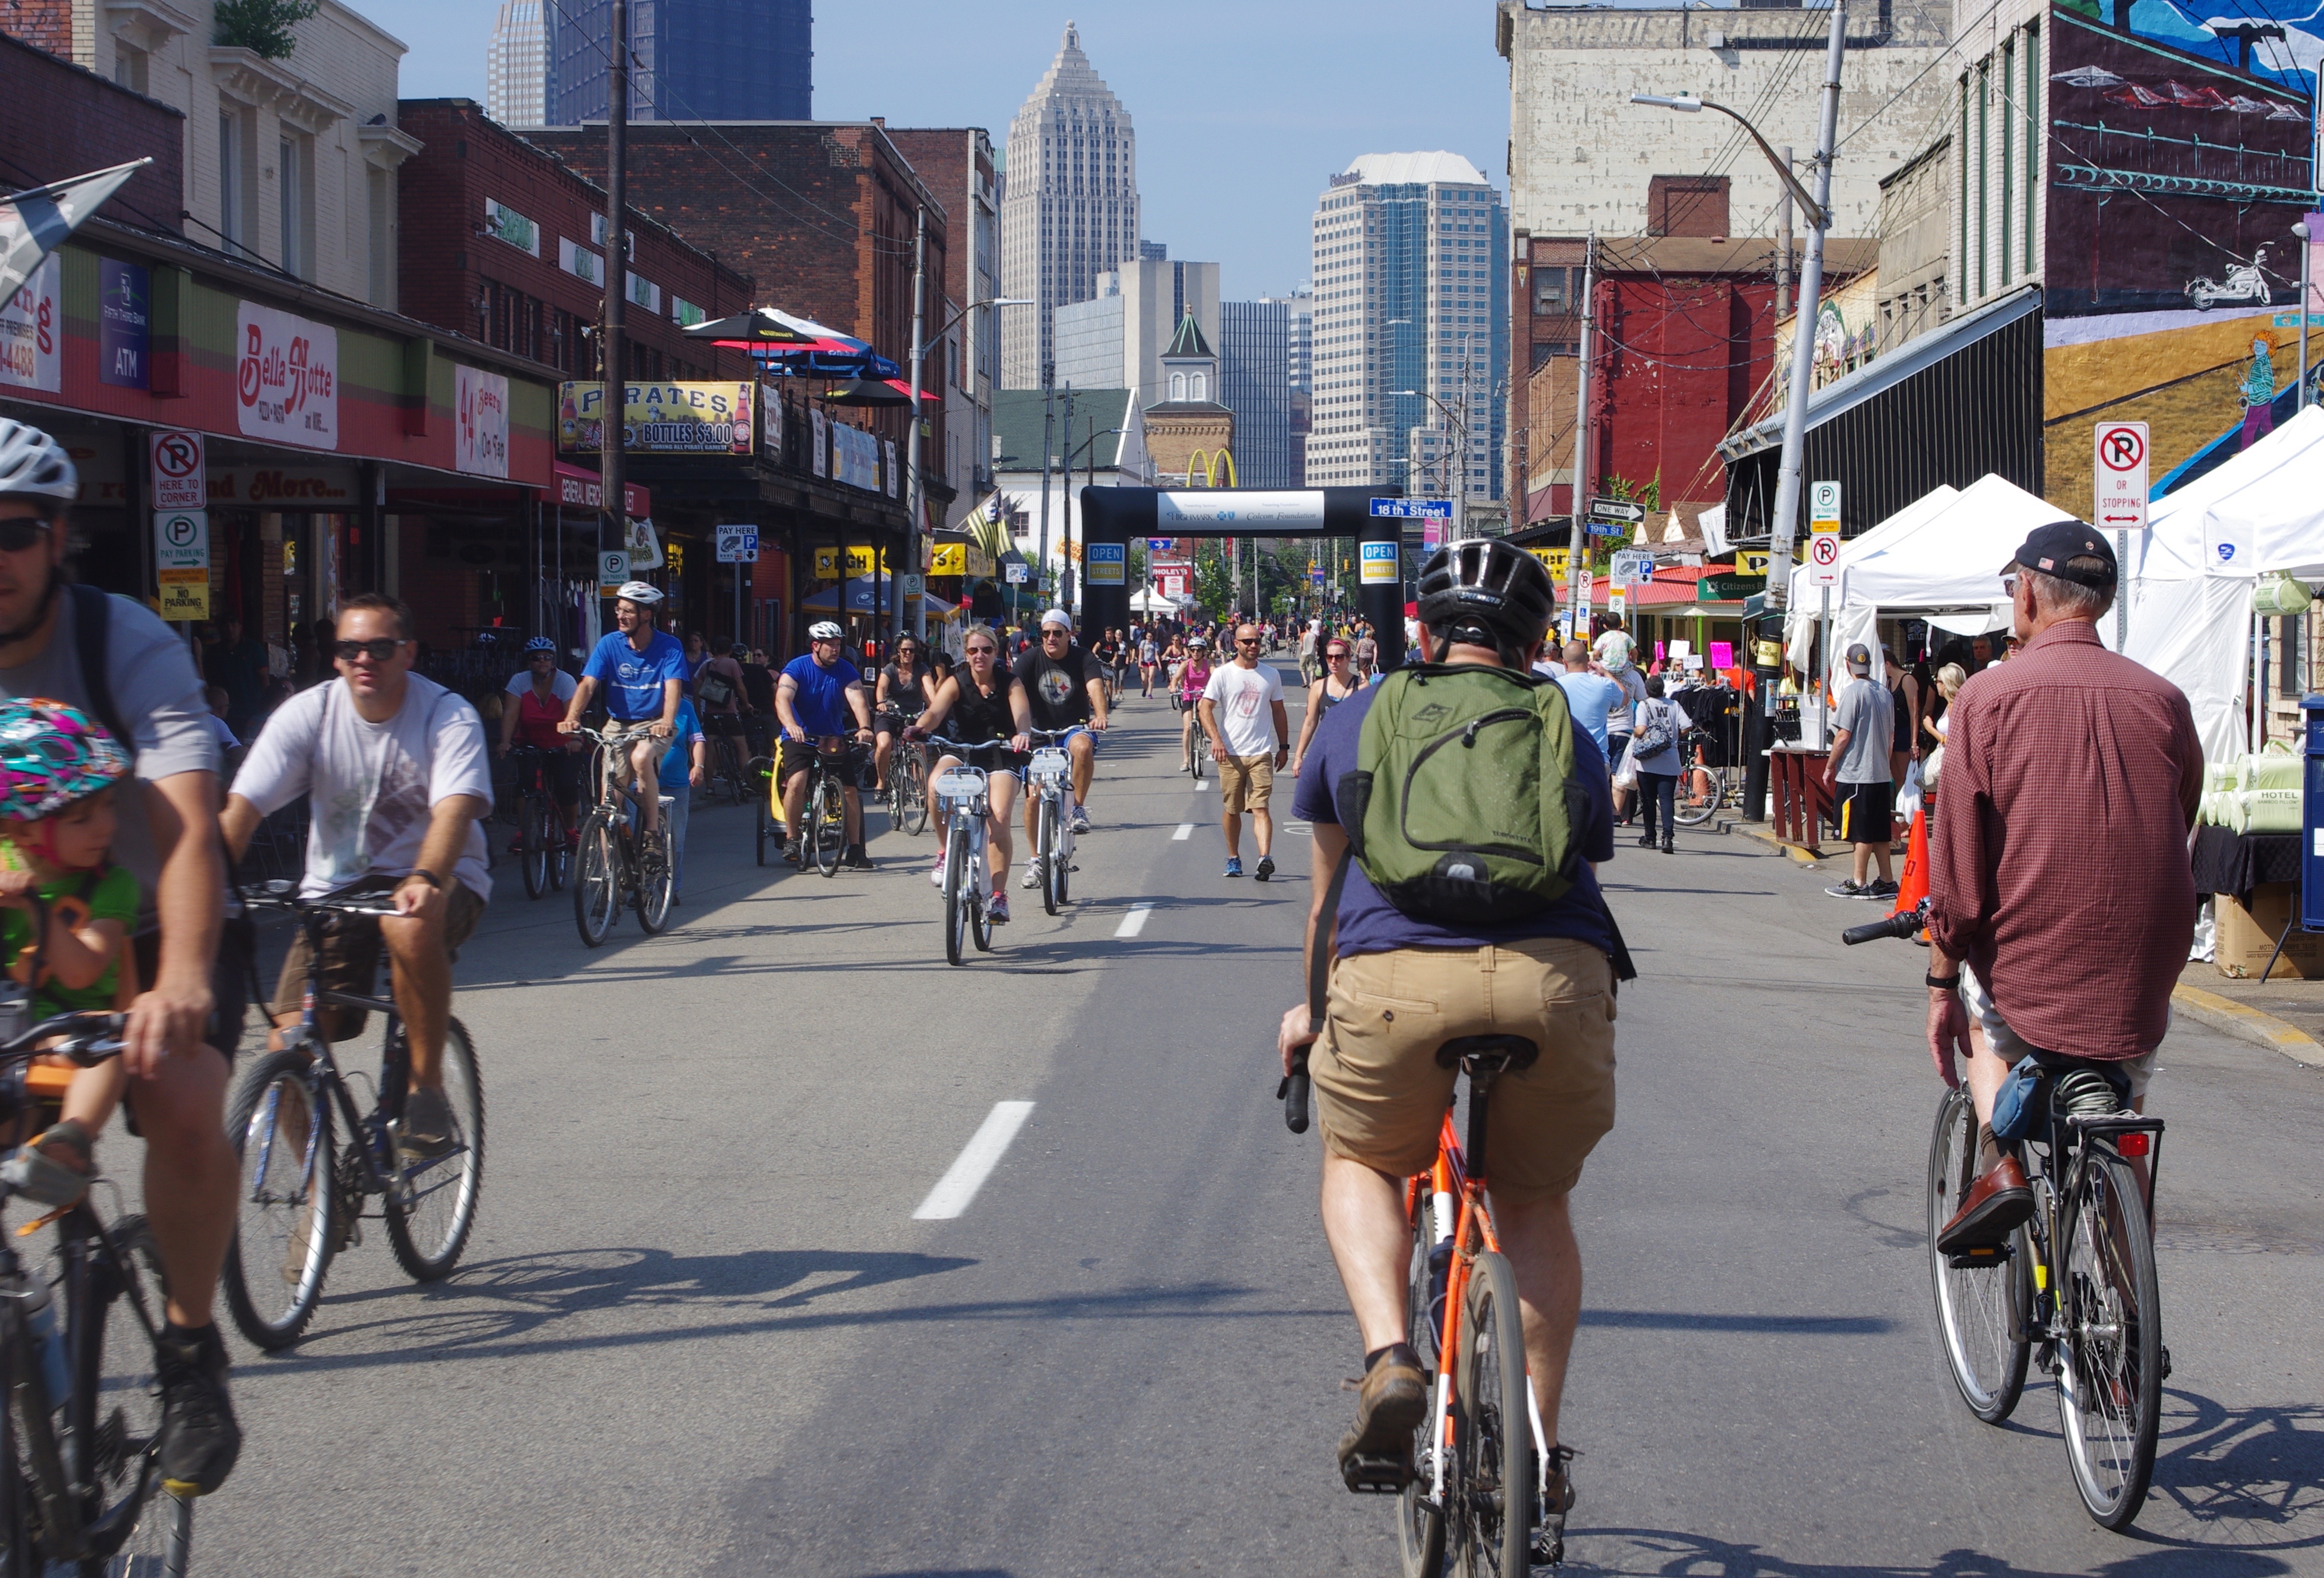 The Strip District was crowded with bikes, walkers, and shoppers during Open Streets PGH.